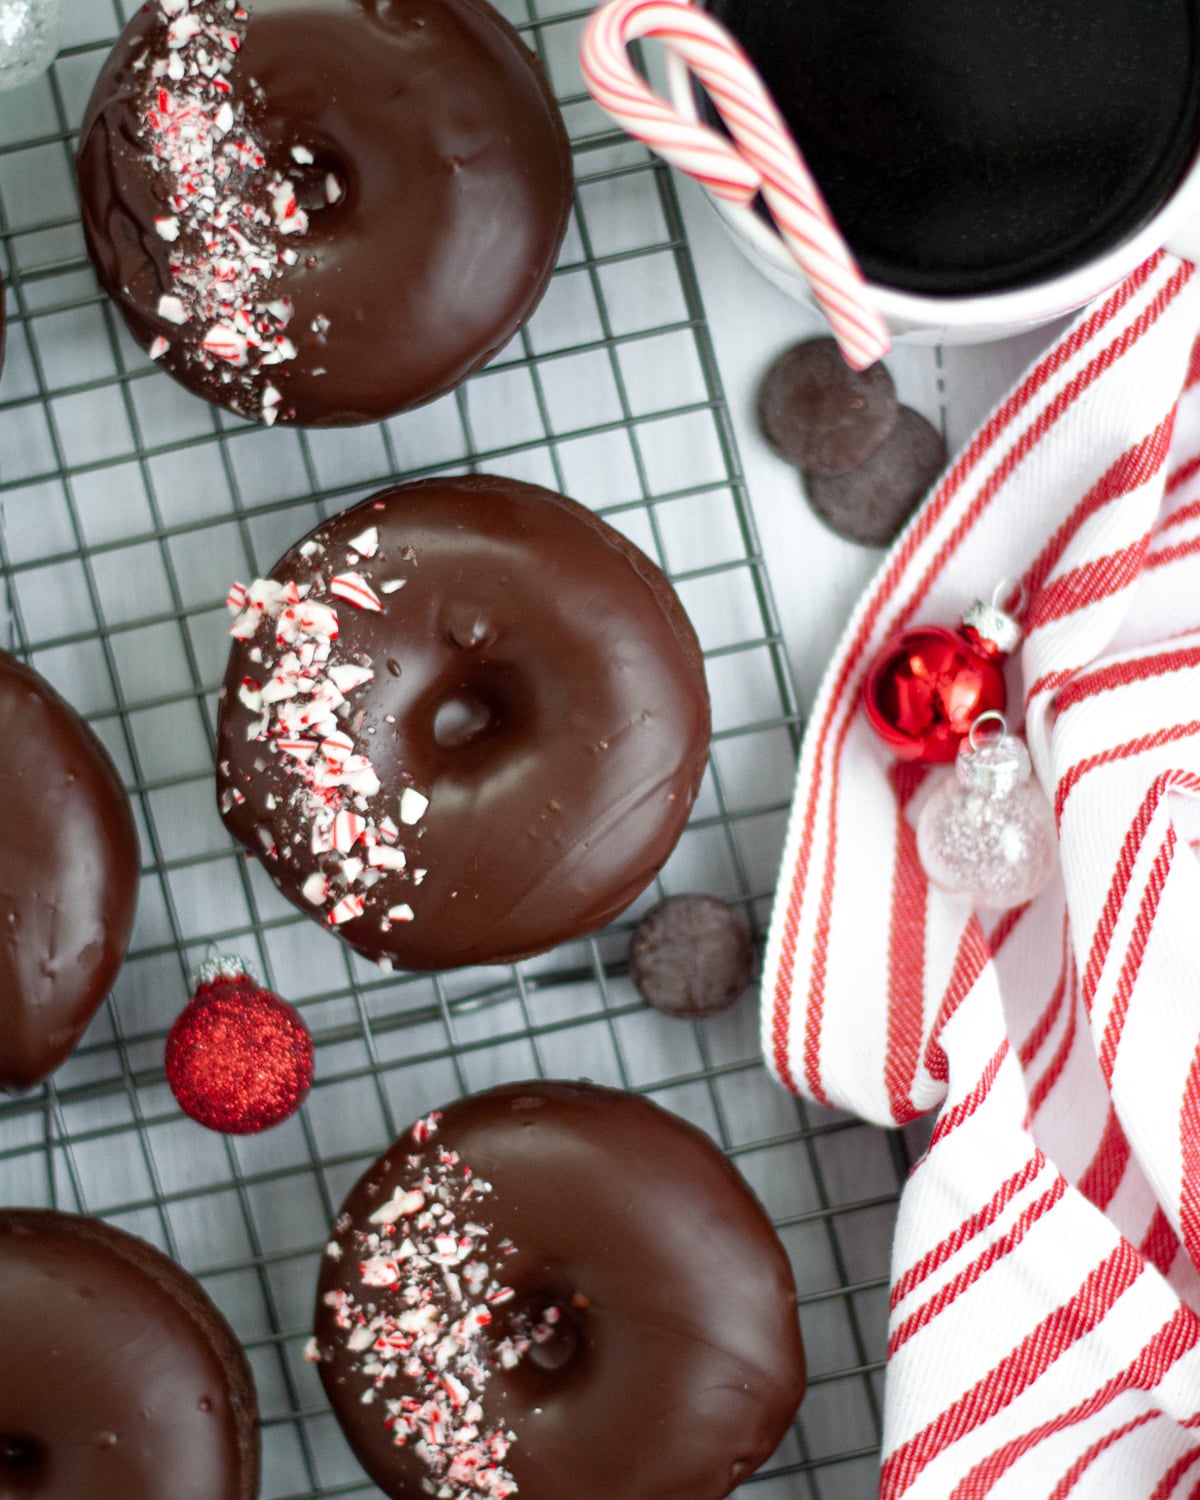 peppermint mocha donuts sitting on a wire cooling rack, cooled and ready to eat. the donuts are surrounded by red and white christmas ornaments, pieces of chocolate, a red and white striped linen, candy canes, and a mug of coffee.